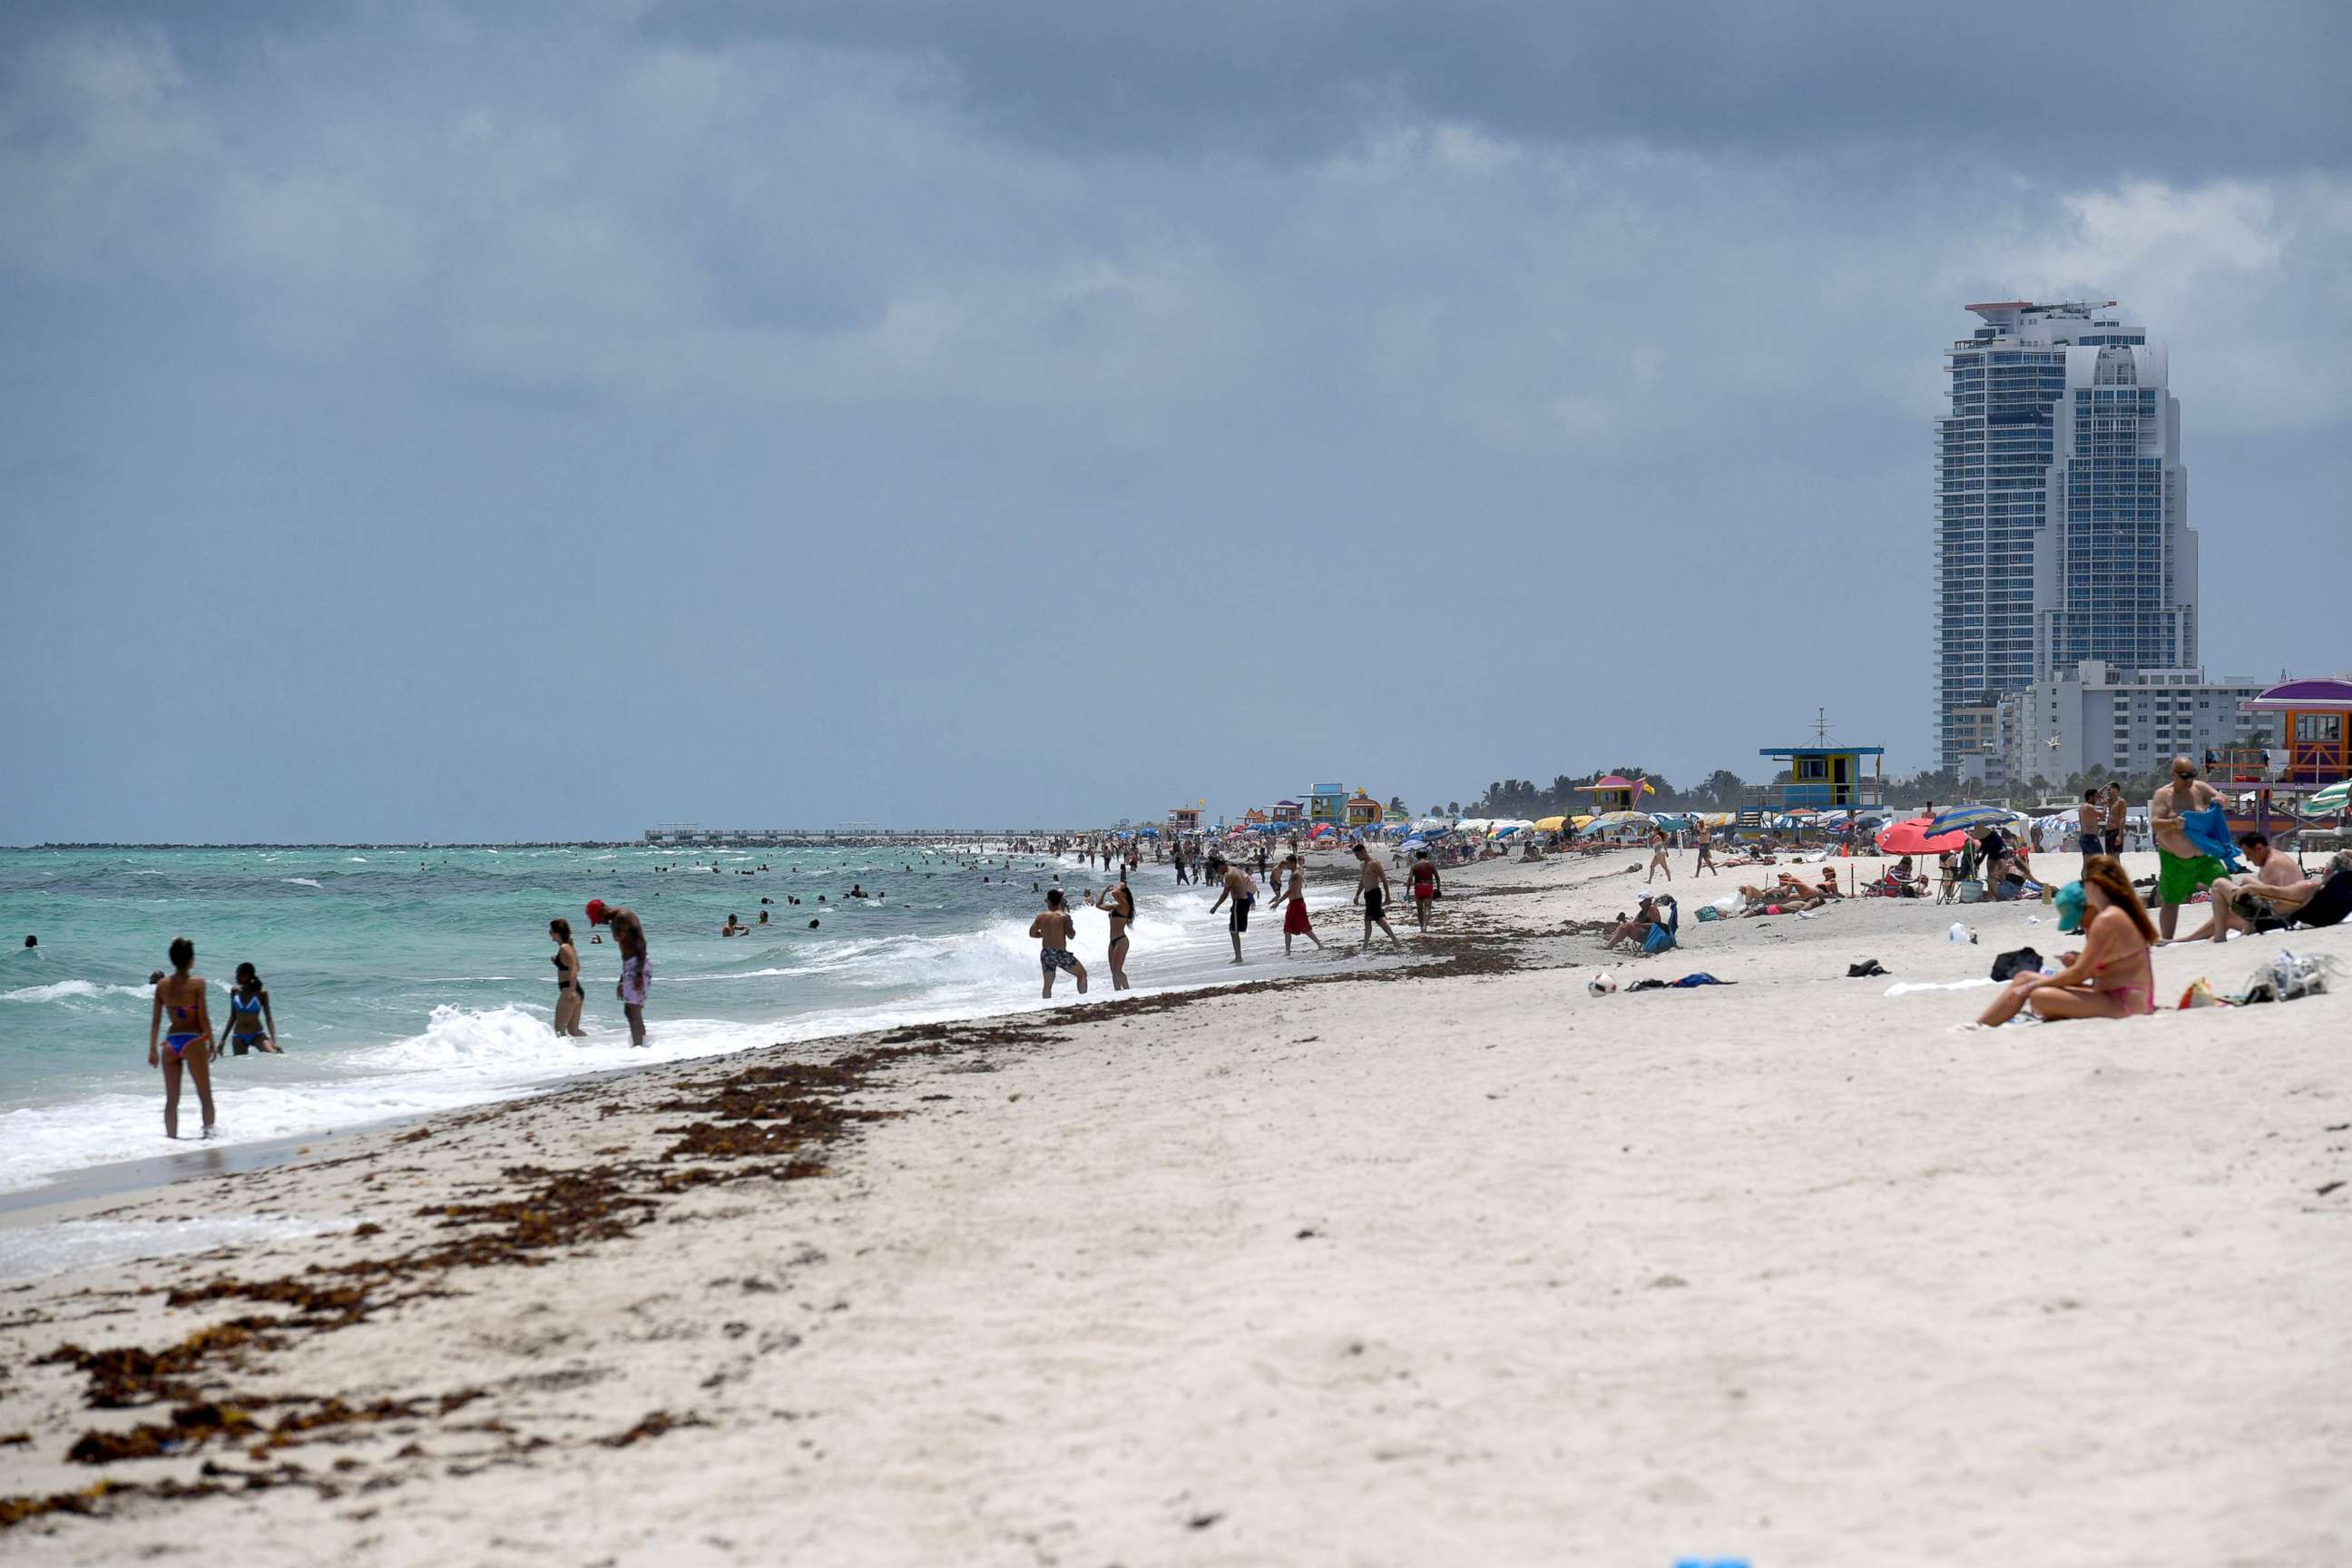 PHOTO: People are seen going about their activities as beaches re-open in accordance with Miami Dade County's Phase 1 during the Coronavirus COVID-19 pandemic, June 12, 2020, in Miami.